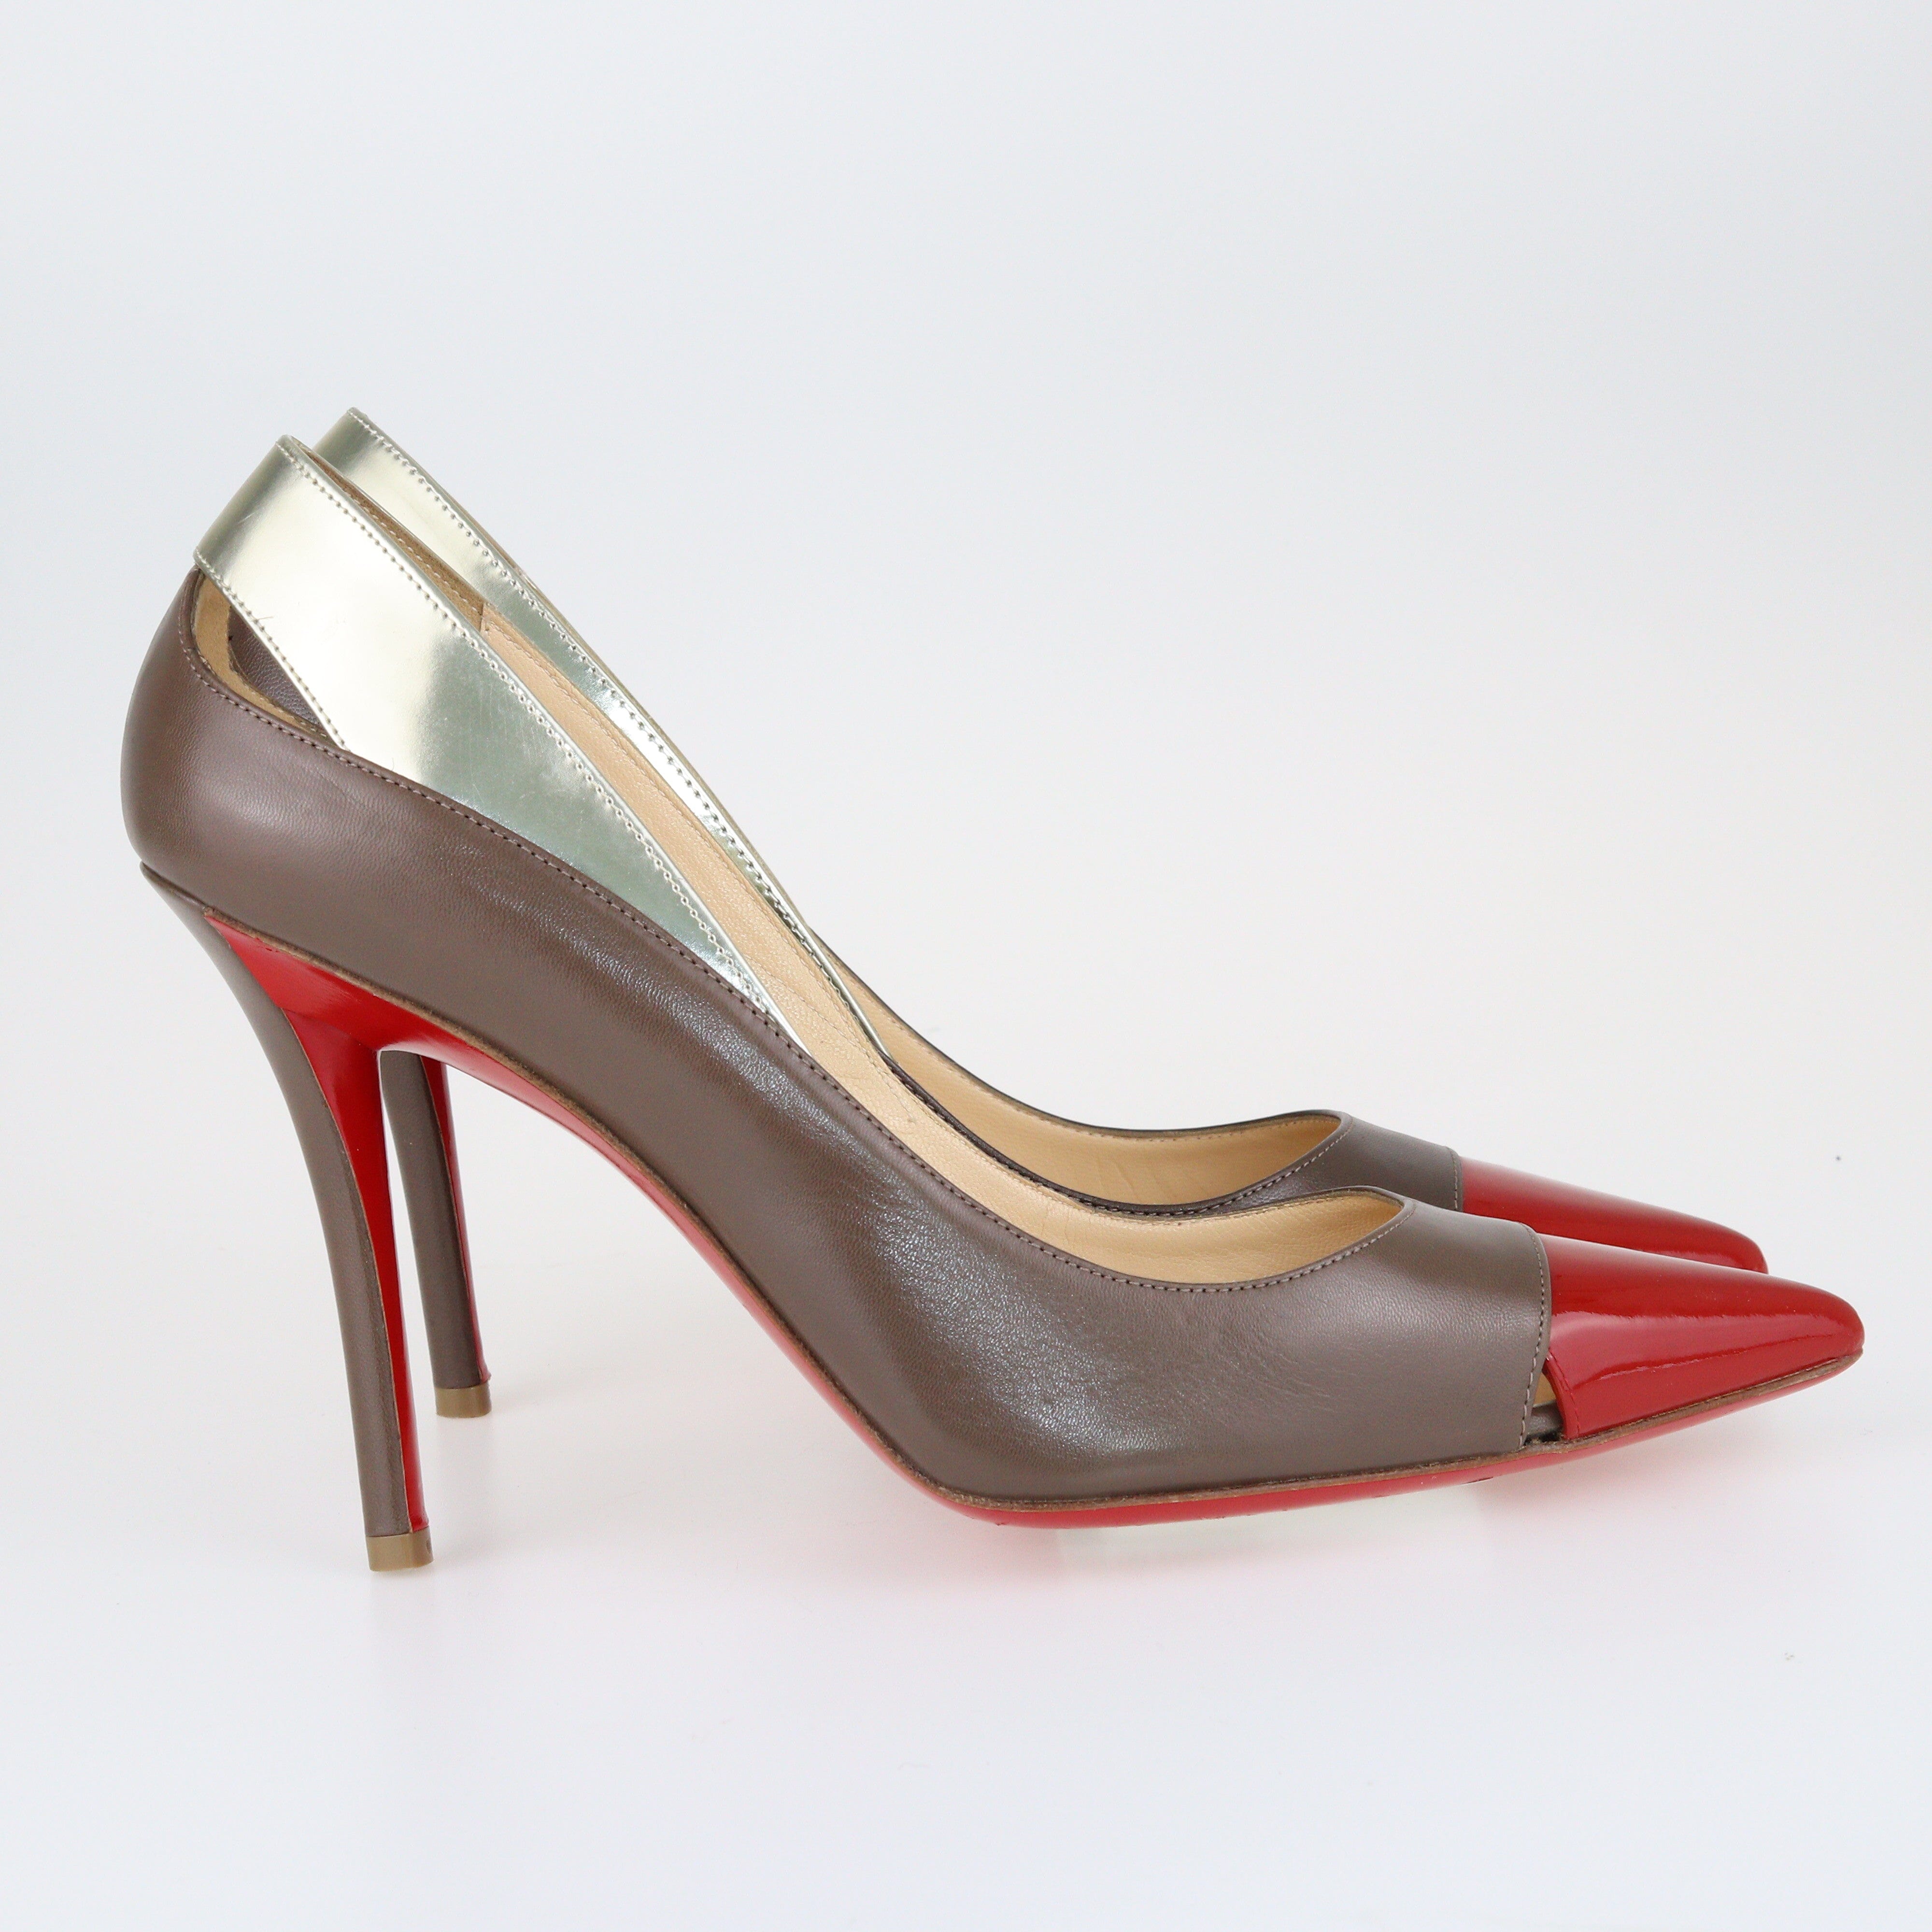 Tri Color Pointed Toe Pumps Shoes Christian Louboutin 